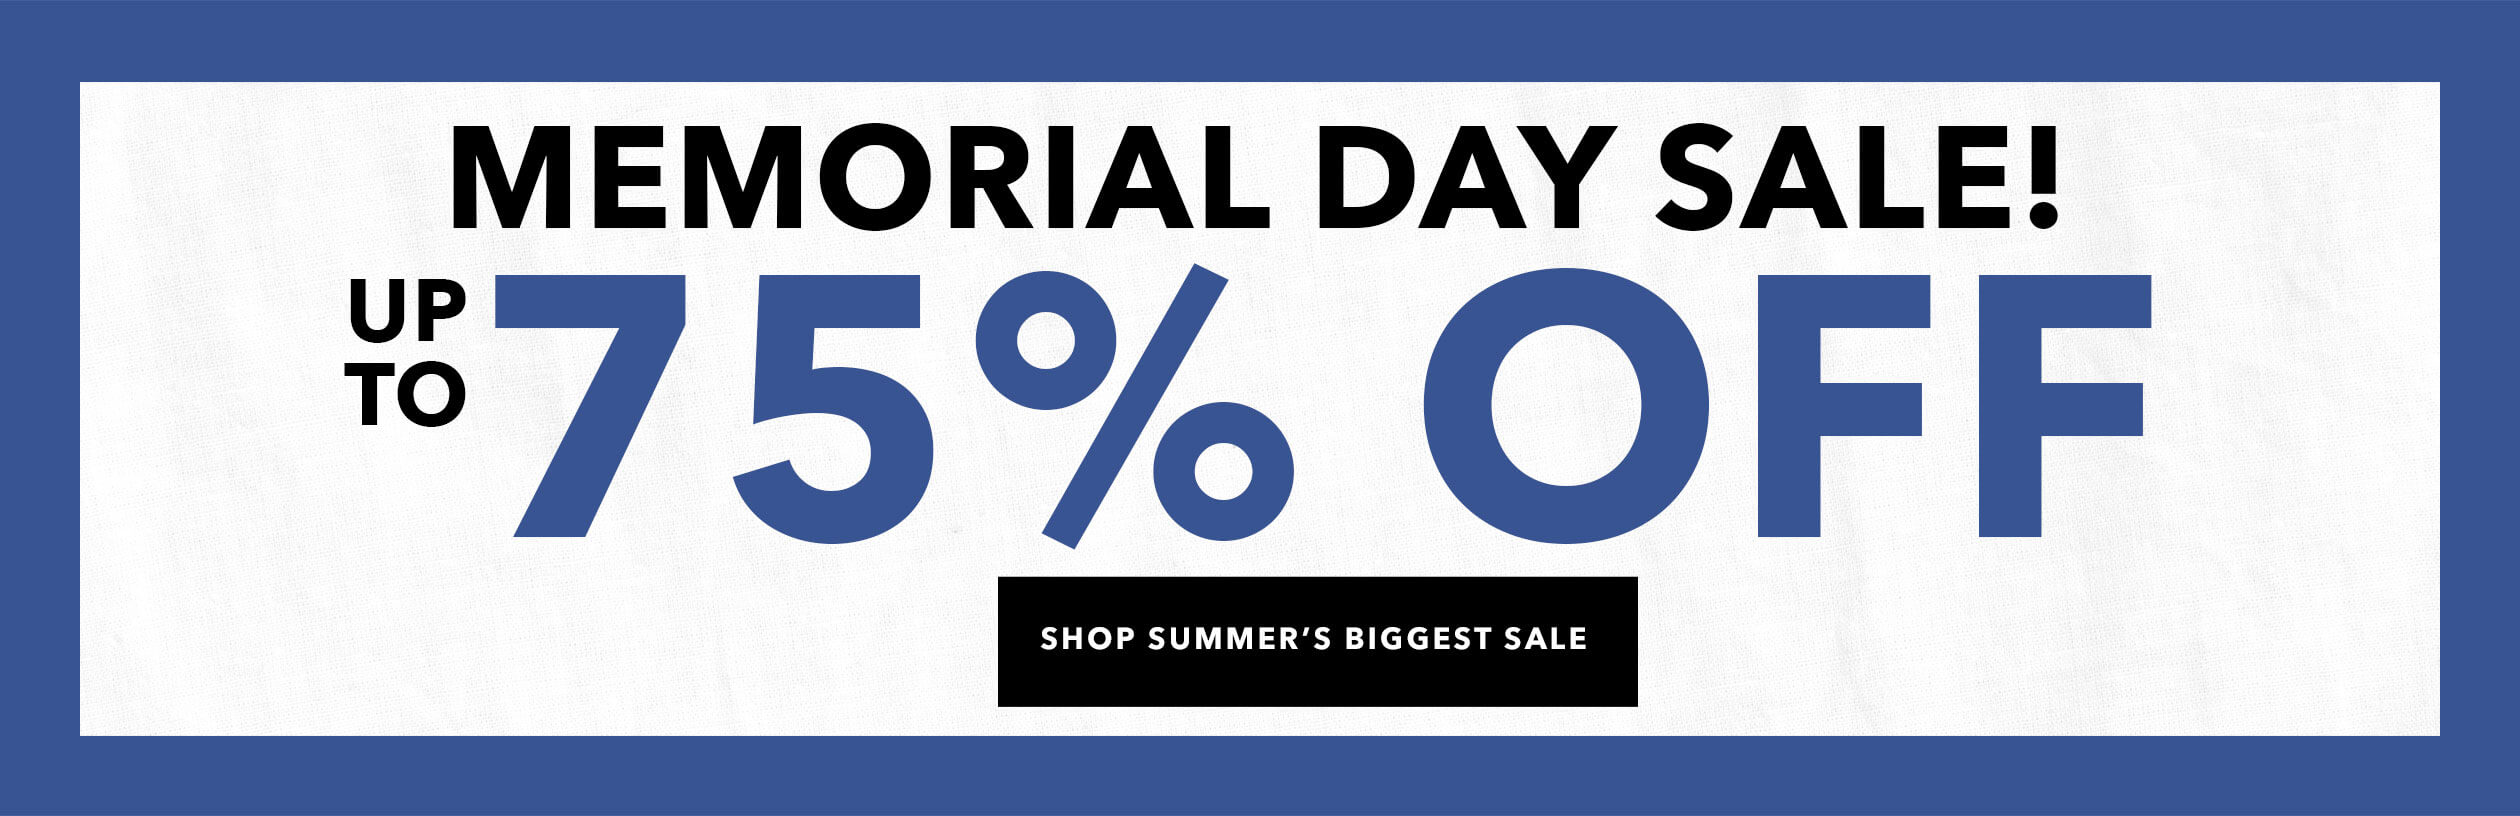 Memorial Day Sale! up to 75% off - shop summer's biggest sale